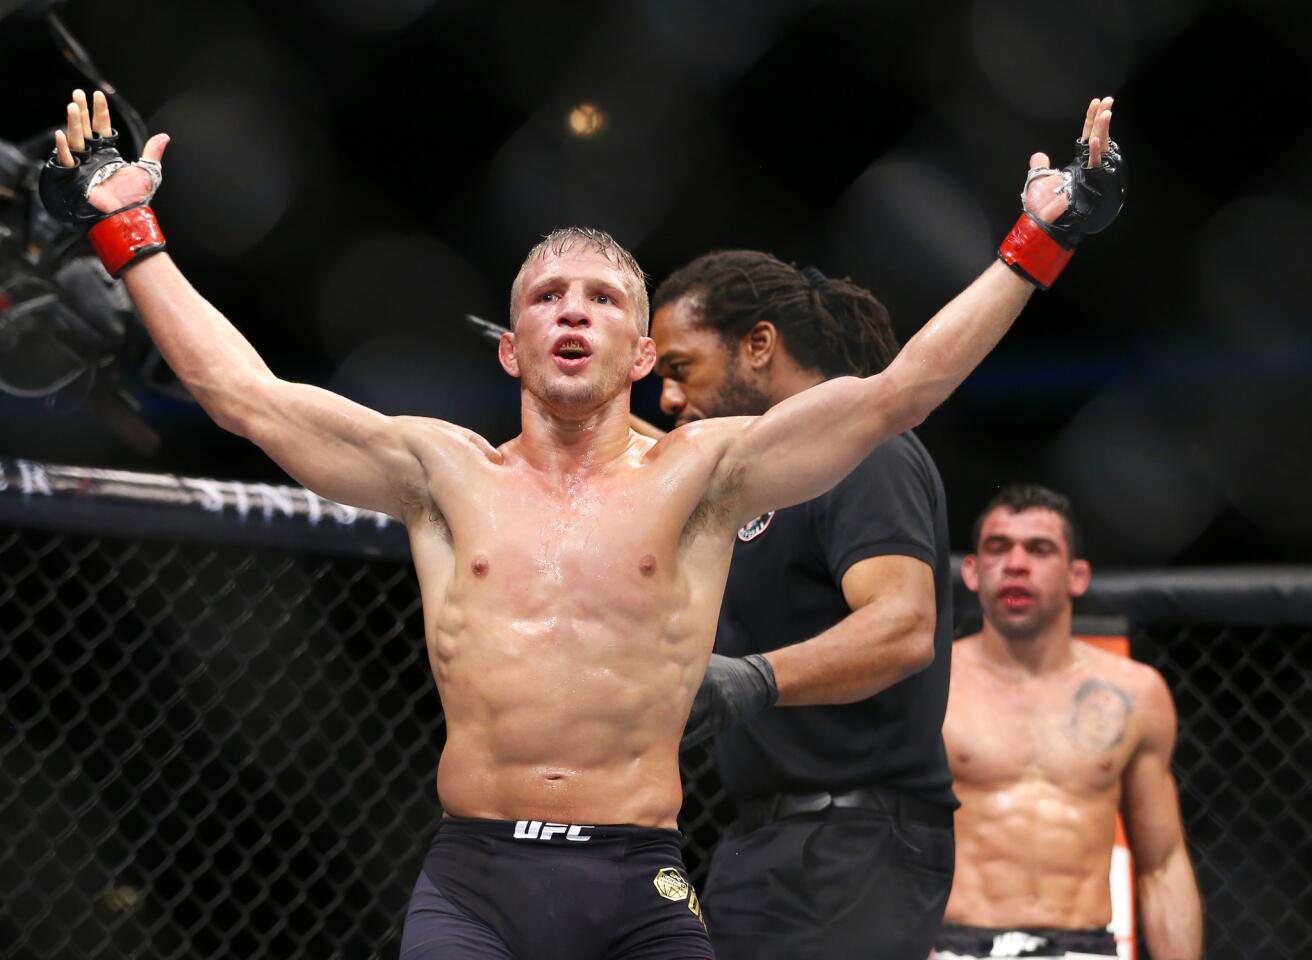 T.J. Dillashaw celebrates after referee Herb Dean stopped the UFC bantamweight championship fight against Renan Barao in the fourth round because of a technical knockout.